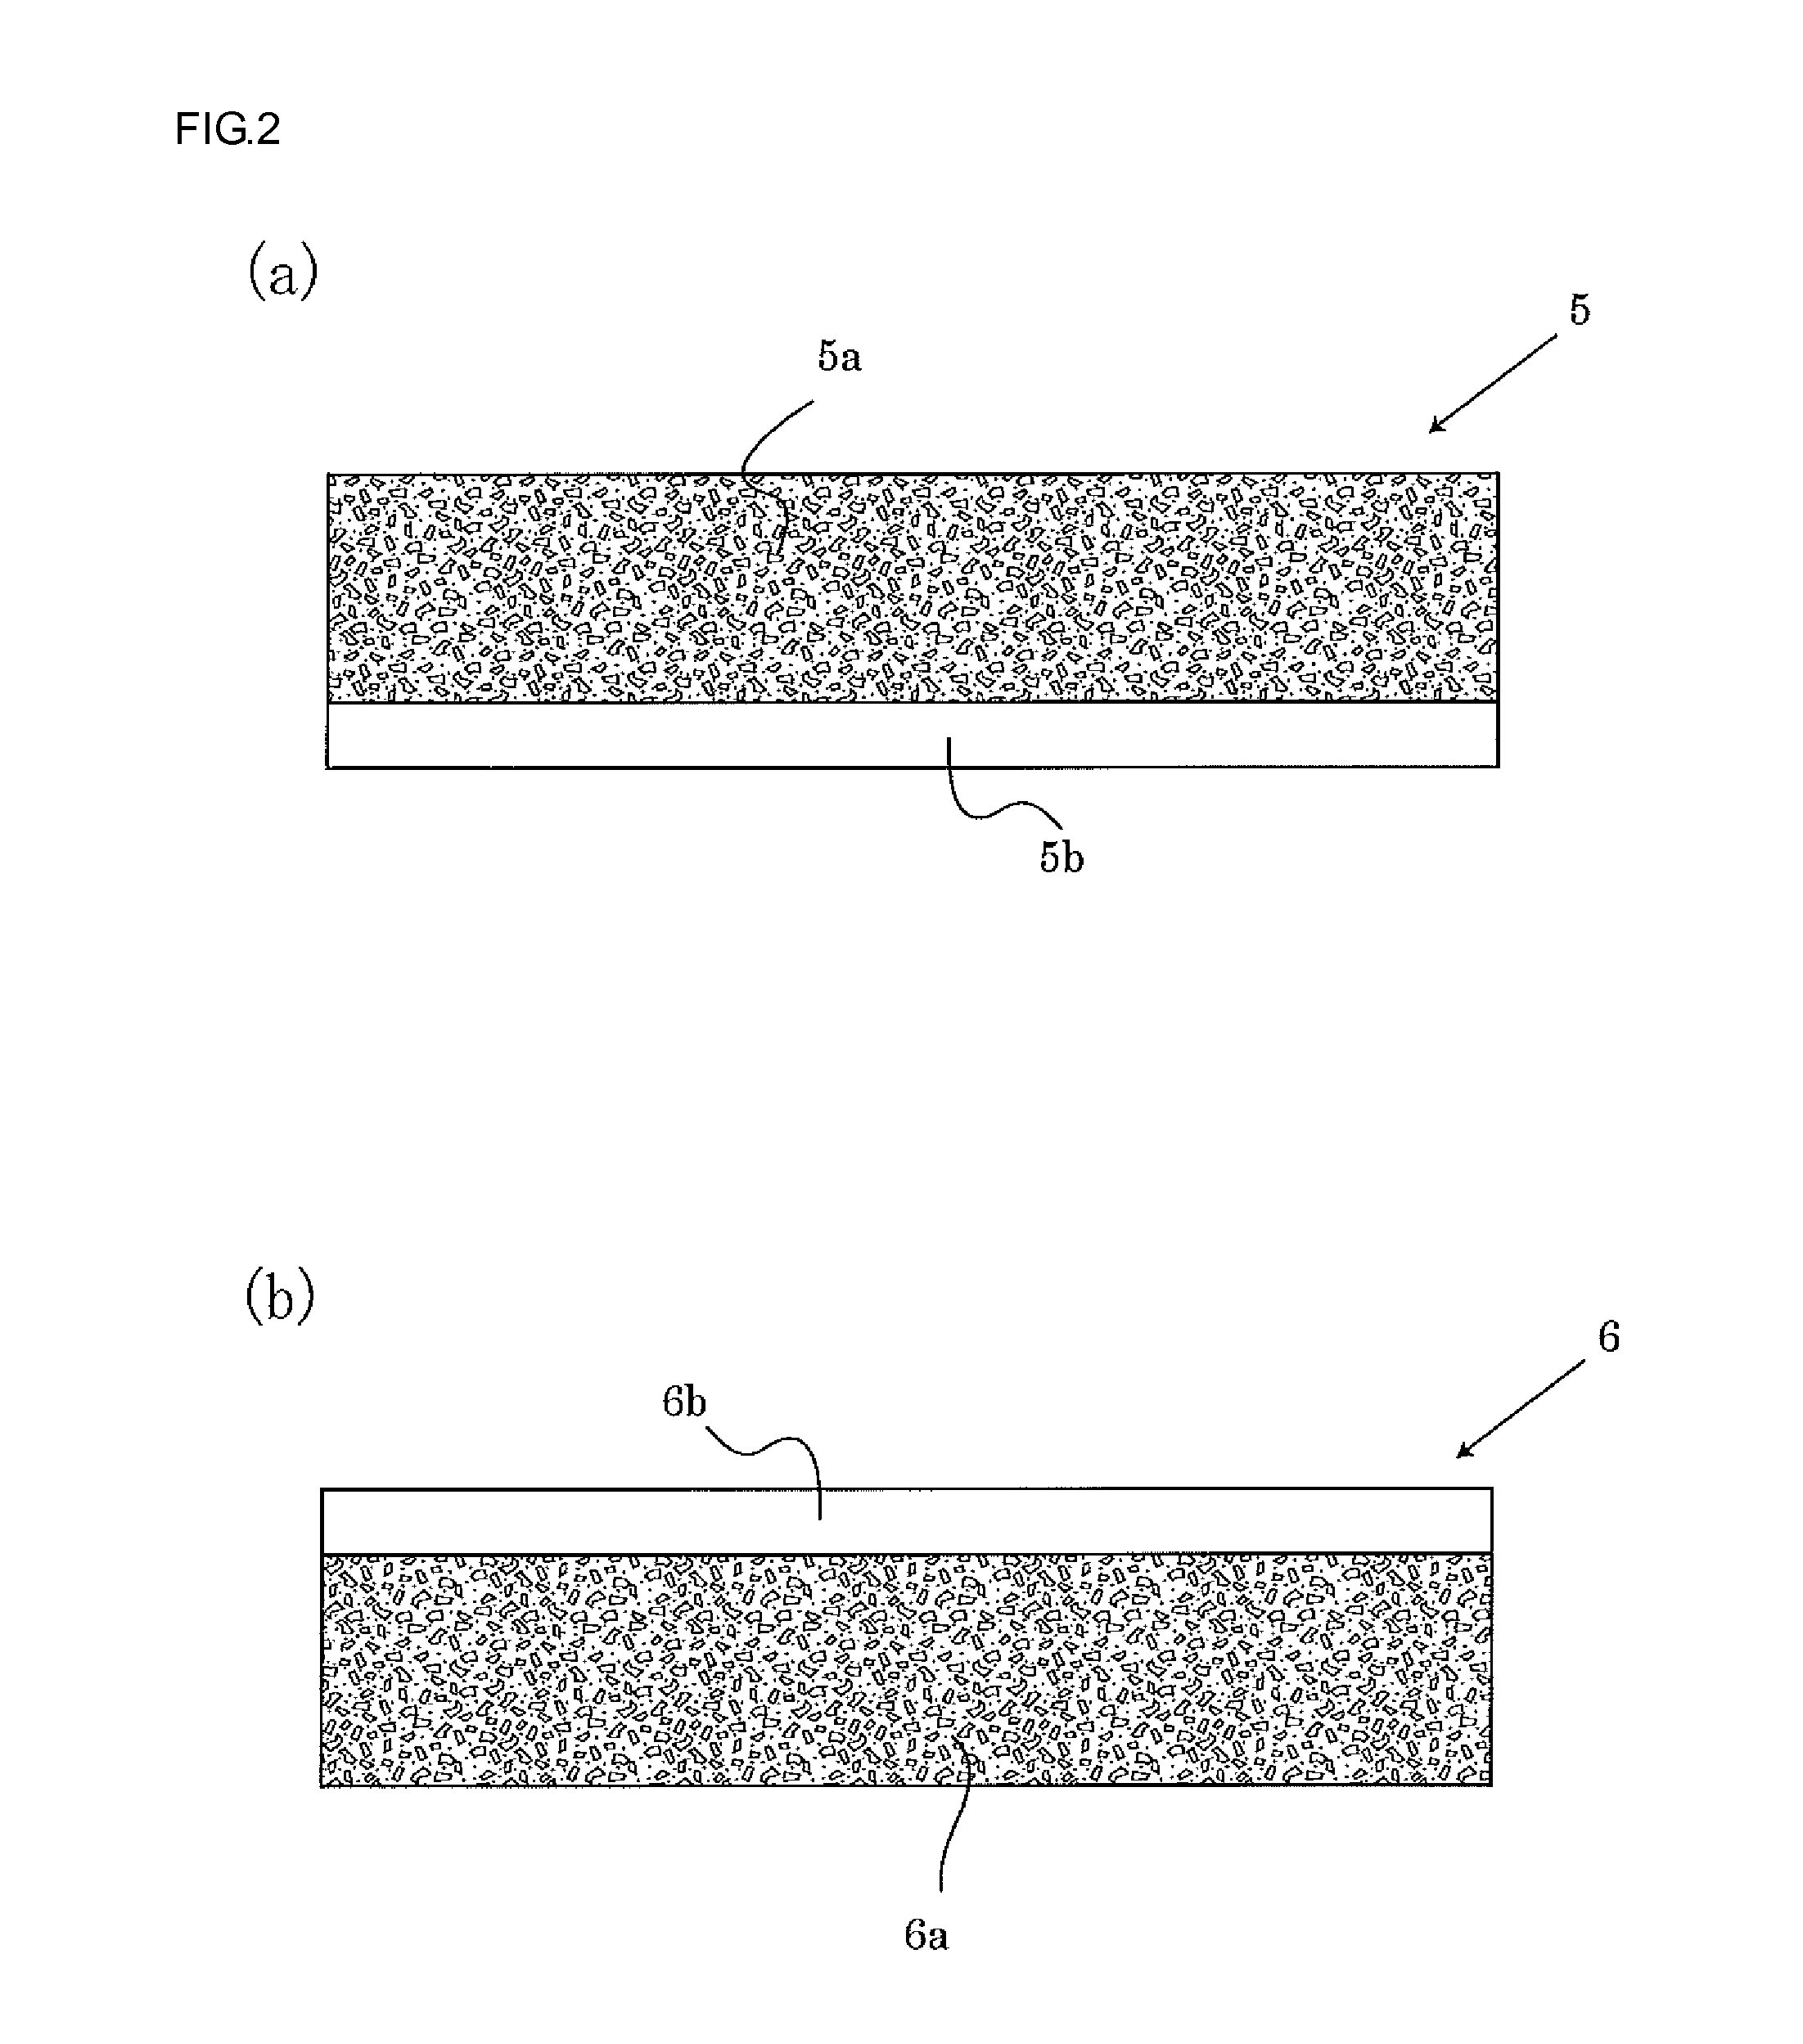 Prismatic sealed secondary cell and method of manufacturing the same